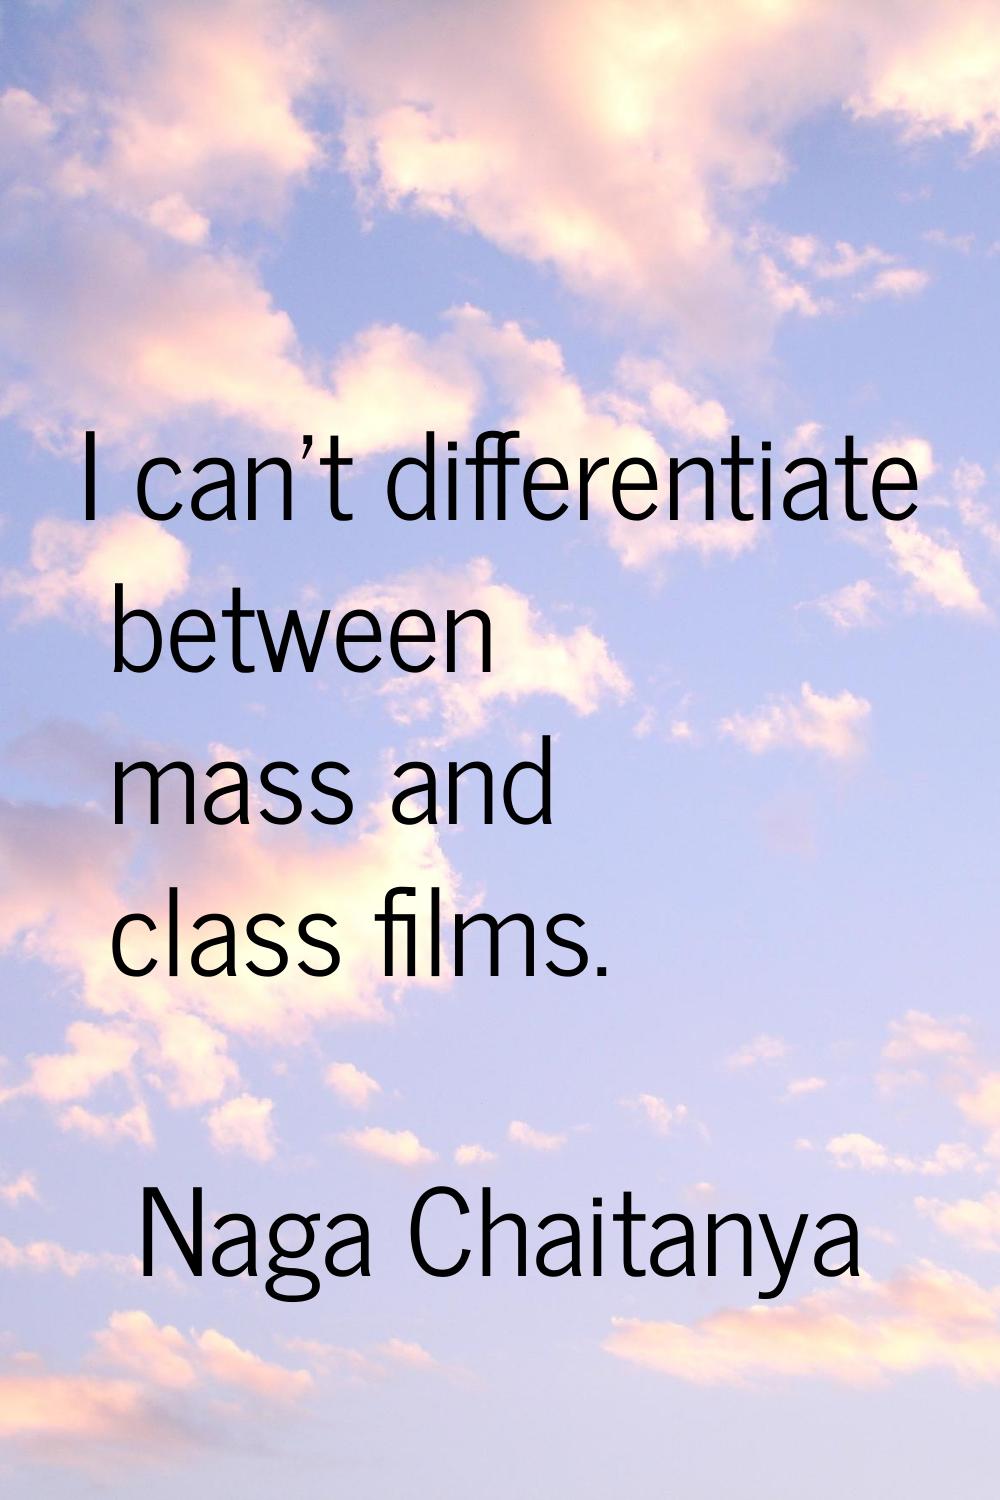 I can't differentiate between mass and class films.